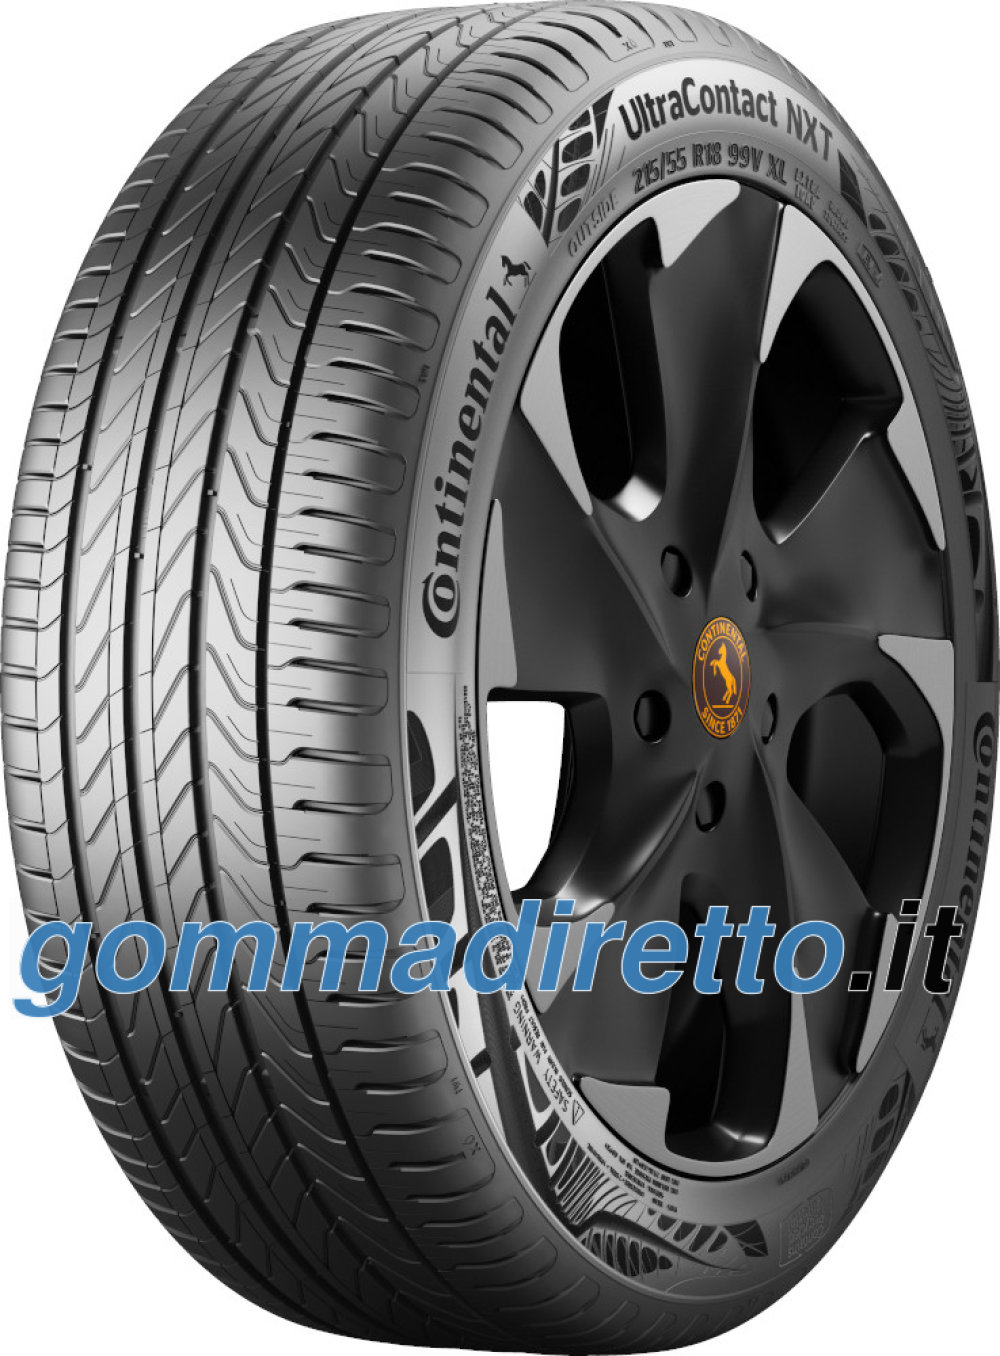 Image of Continental UltraContact NXT - ContiRe.Tex ( 215/55 R17 98W XL CRM, EVc )